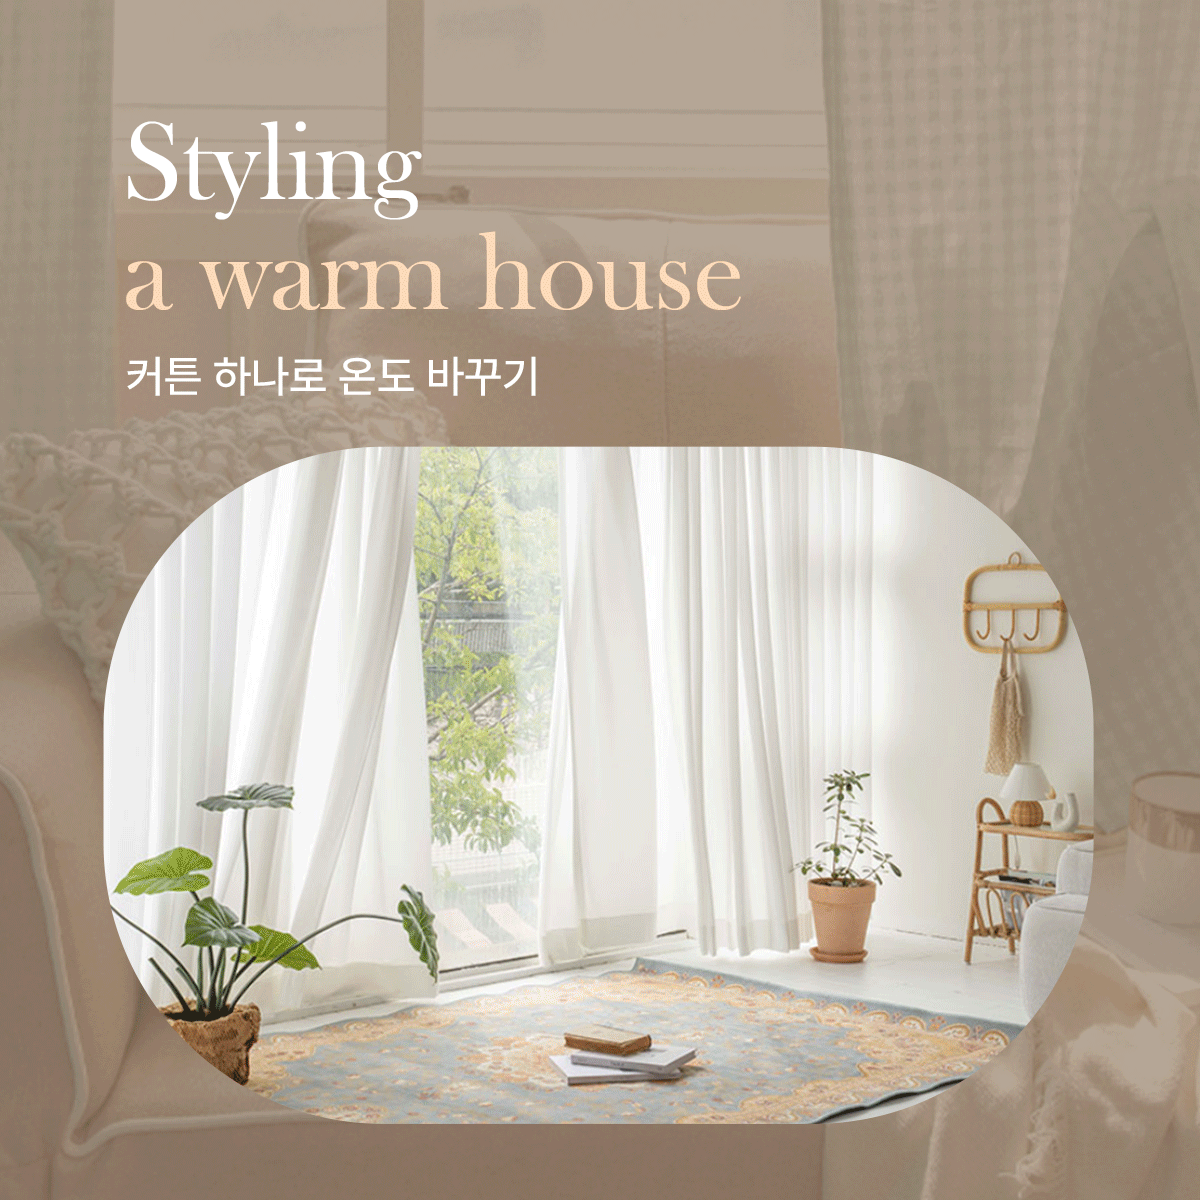 Styling a warm house